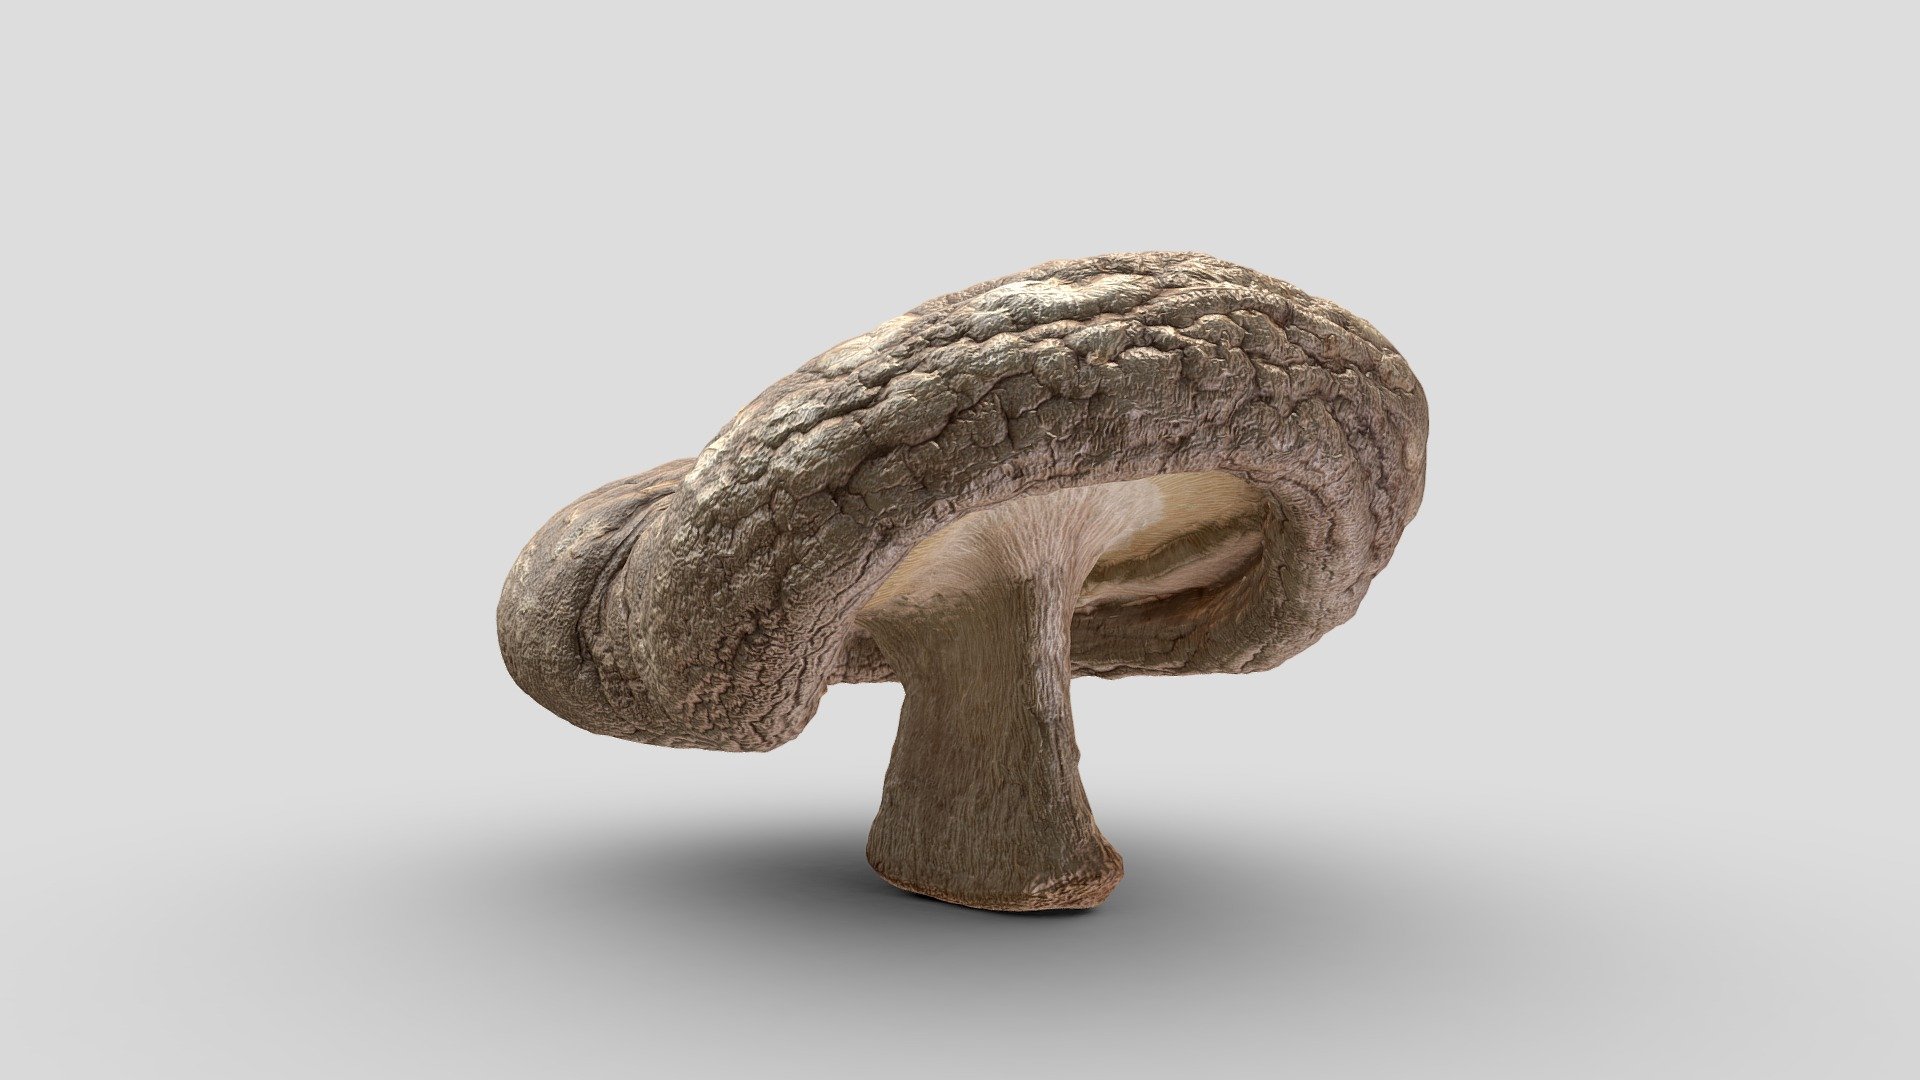 SCANNED DRIED SHIITAKE MUSHROOM
Photoscanned, retopologized and UV-remapped Dried Shiitake Mushroom with baked 4K Textures from 67 masked photos.

REAL SCALE
Width: 3.13cm / Length: 4.45cm / Height: 2.23cm




Final scan has 1.022.332 polys

Retopologized down to 13.4k squares (26.8k polys)

File size with Textures was 230MB, now 69MB

67 photos used

Baked 4K Textures

Soon available in the shop 3d model